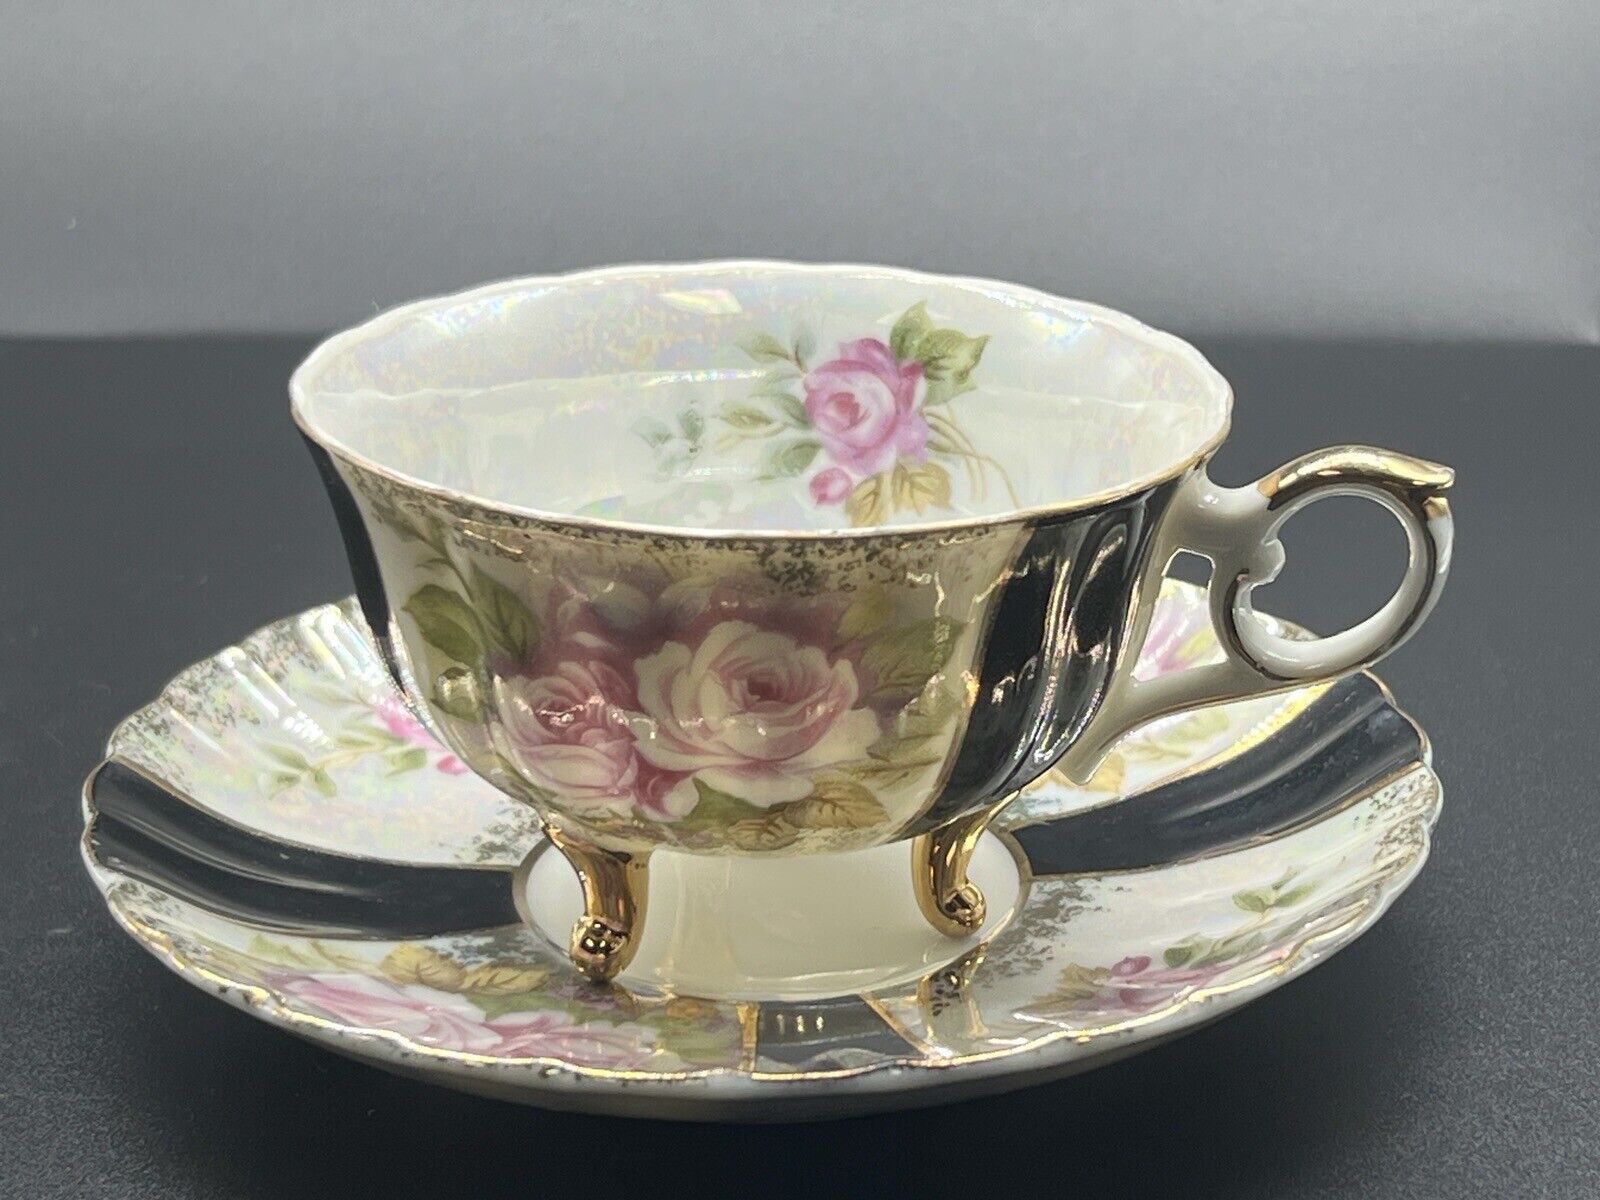 Vintage LEFTON China Fancy Cup and Saucer. Pearly Iridescent finish Pink Roses~